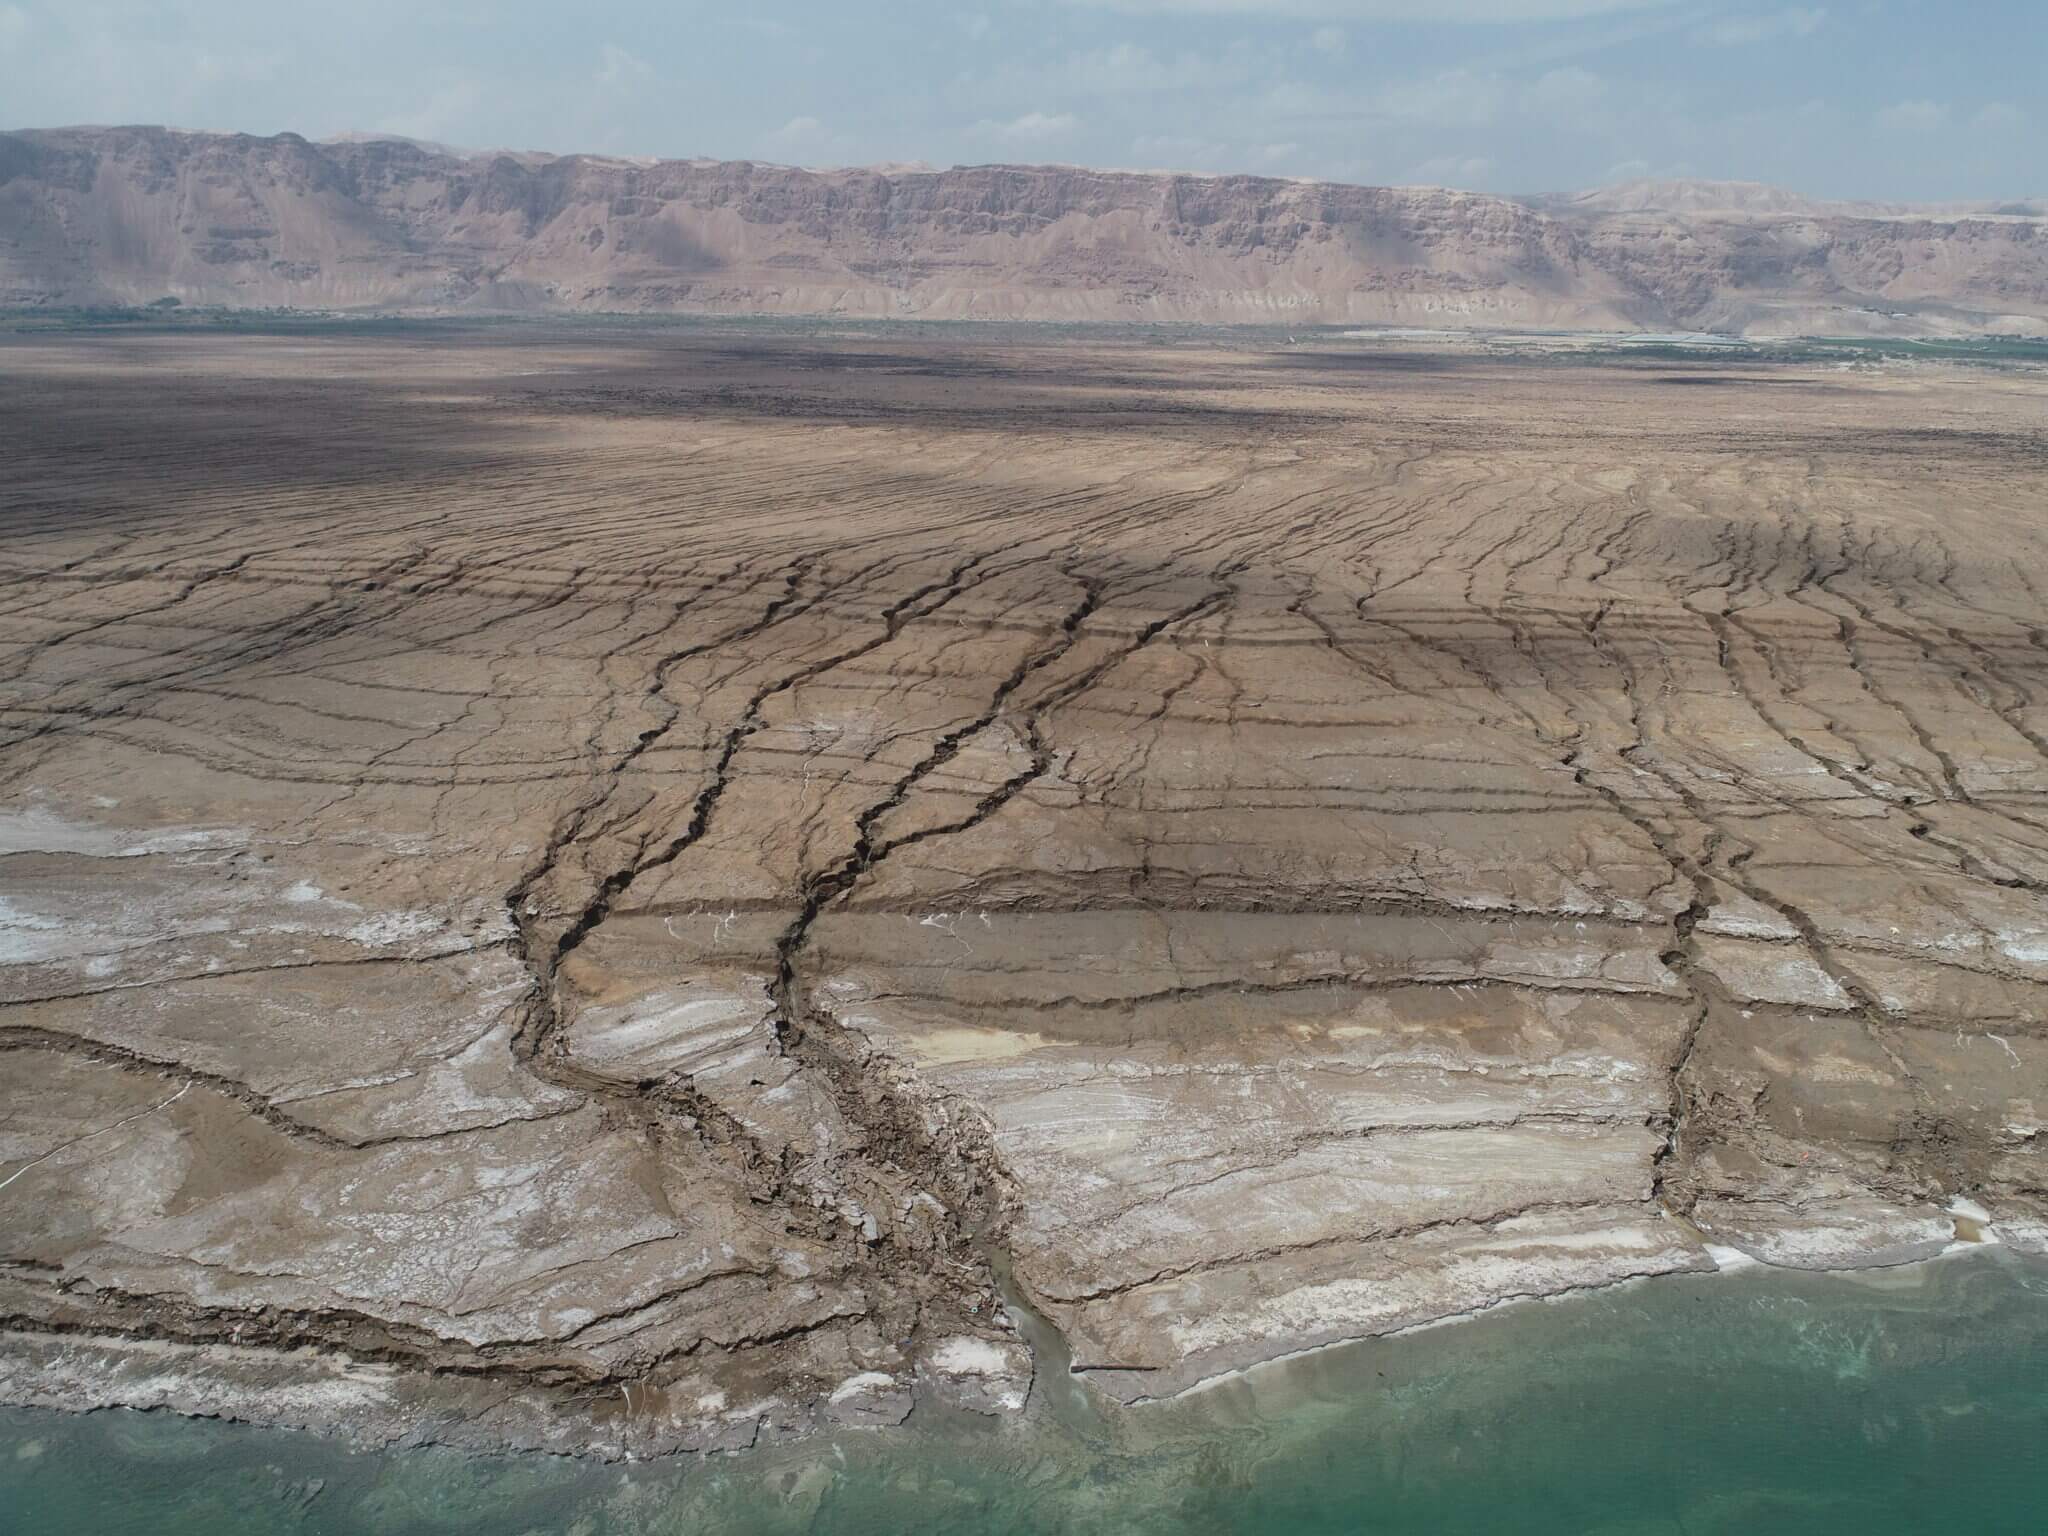 Channels at the mouth of the Qumran River. Drone photos: Liran Ben Moshe, Geological Institute